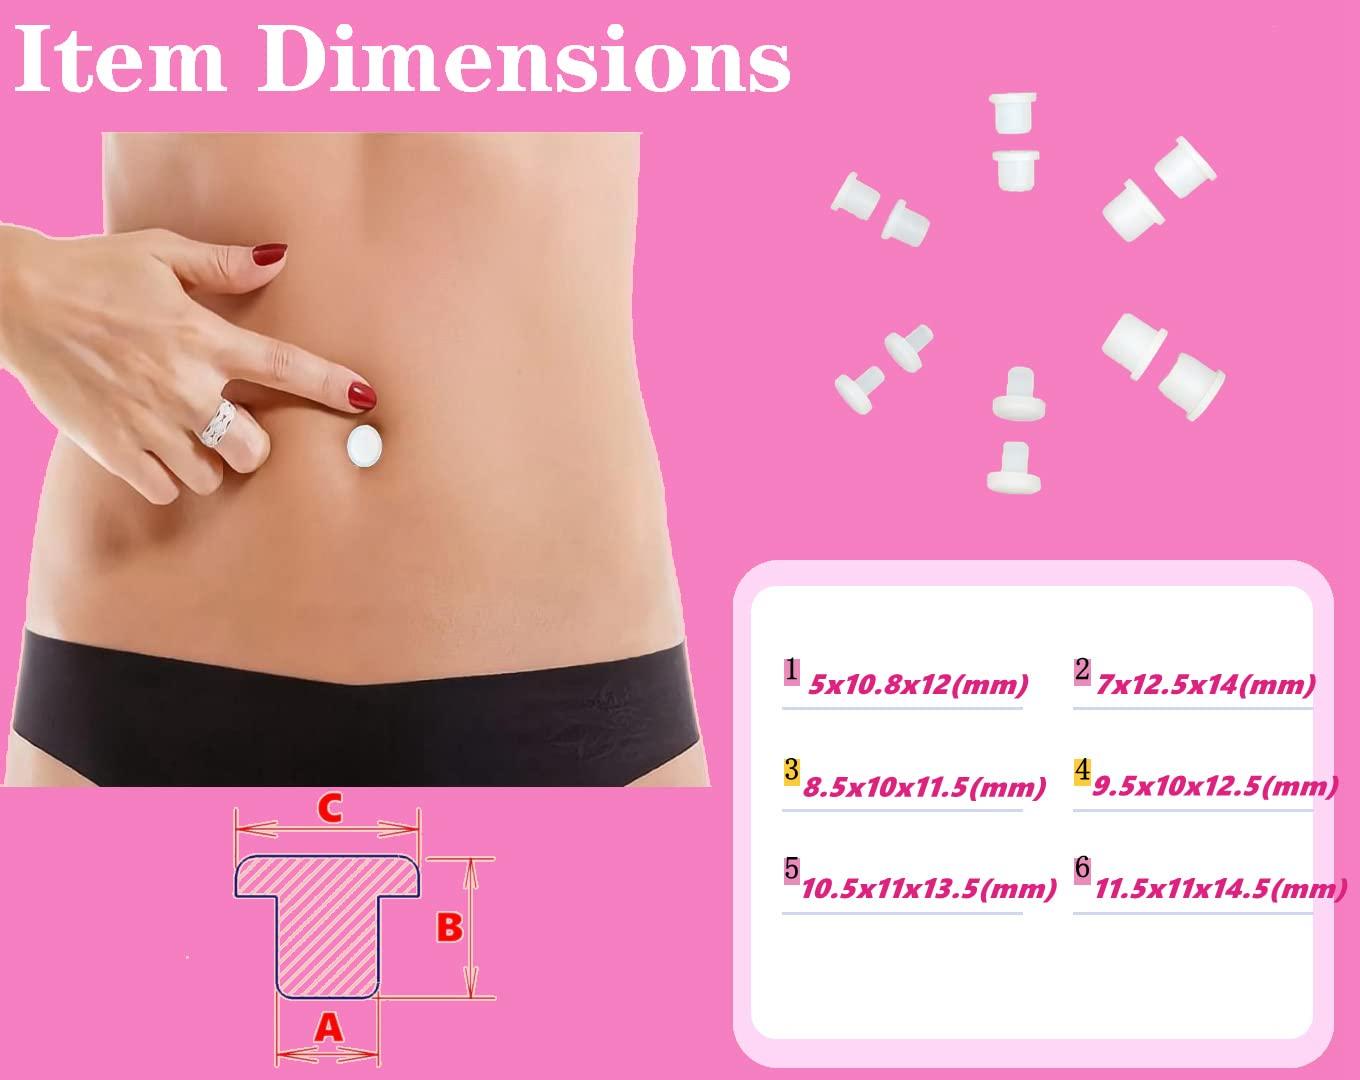 Cheap Navel Belly Button Shaper for Post Liposuction Belly Button Plug Belly  Button Shaper for Tummy Tuck